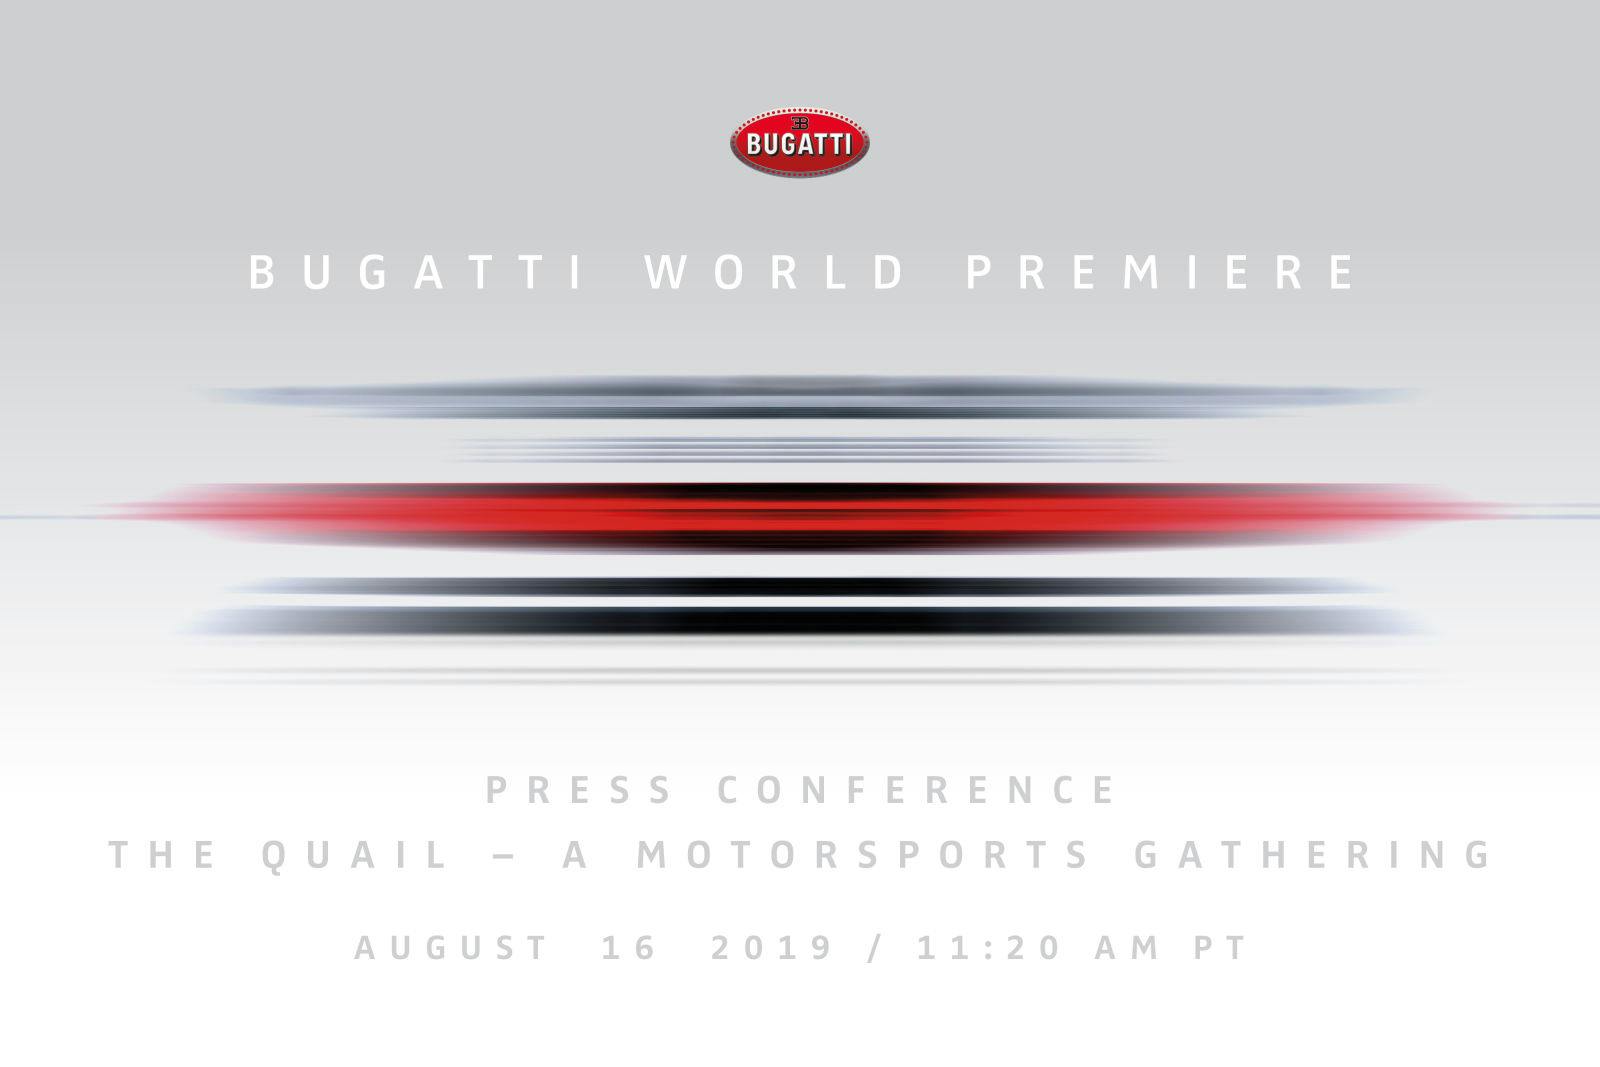 16. August, 11:20 Uhr Pacific Time, The Quail – A Motorsports Gathering